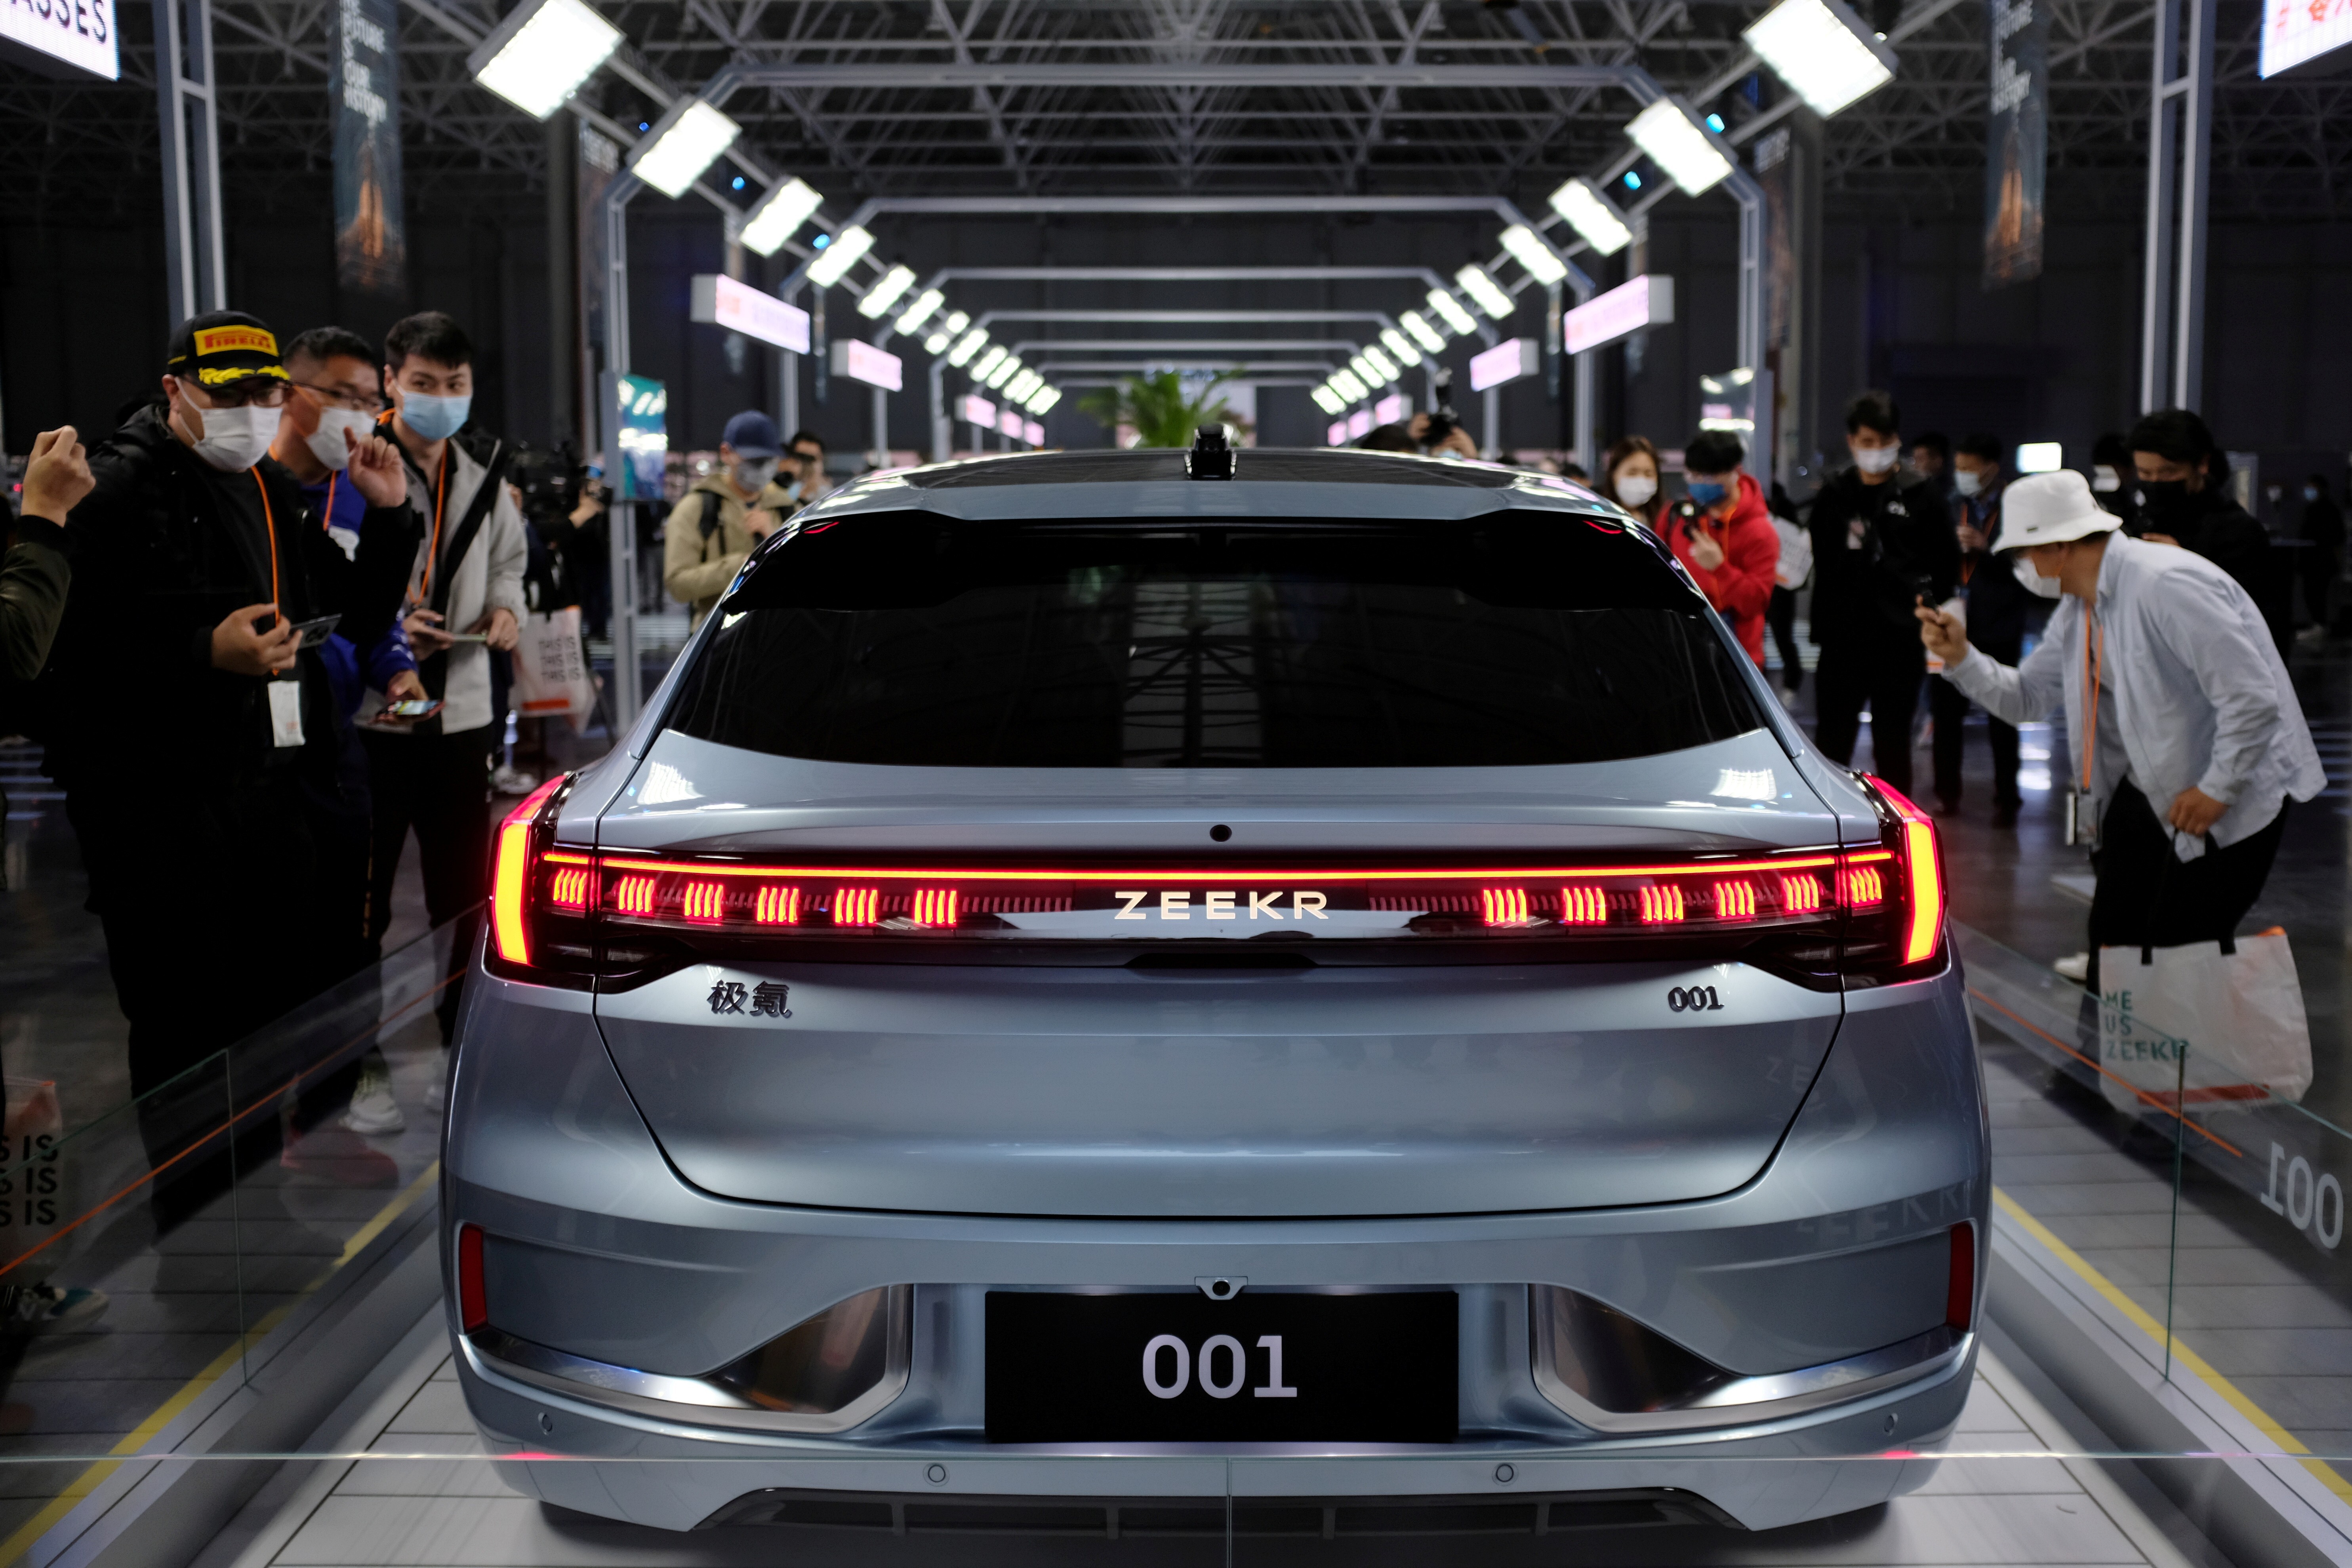 Visitors checkout Zeekr 001, a model from Geely's new premium electric vehicle brand Zeekr, at its factory in Ningbo, Zhejiang province. Photo: Reuters